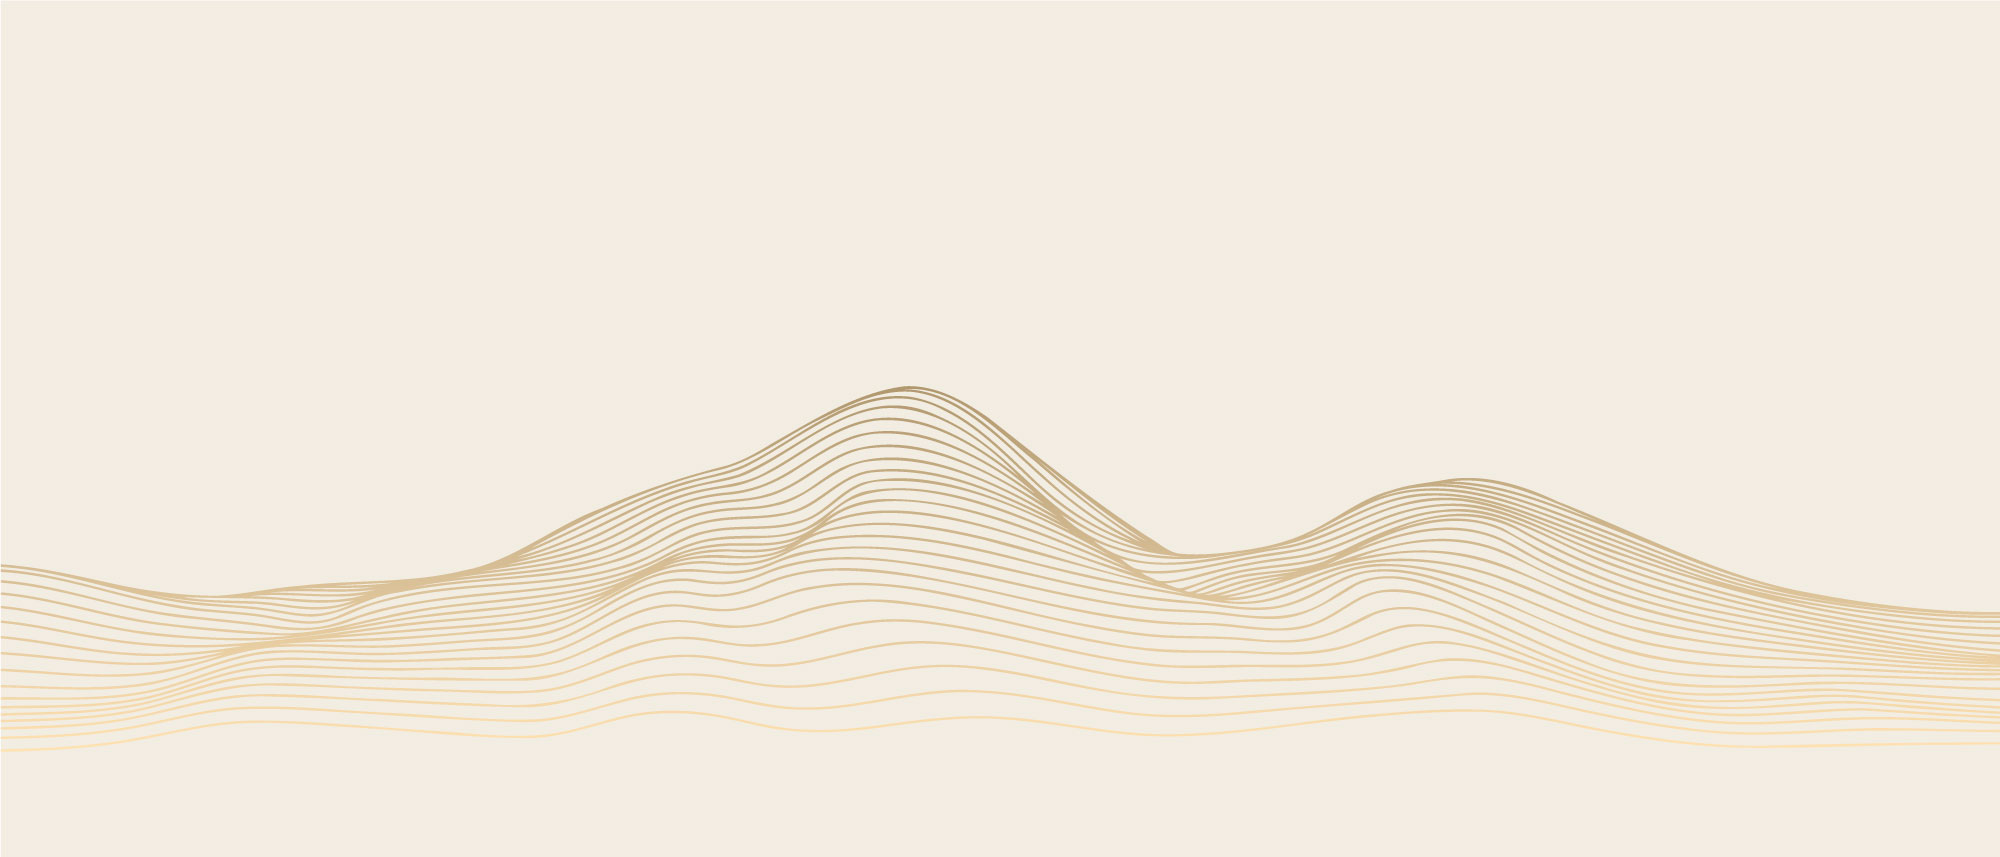 graphic of a mountain range